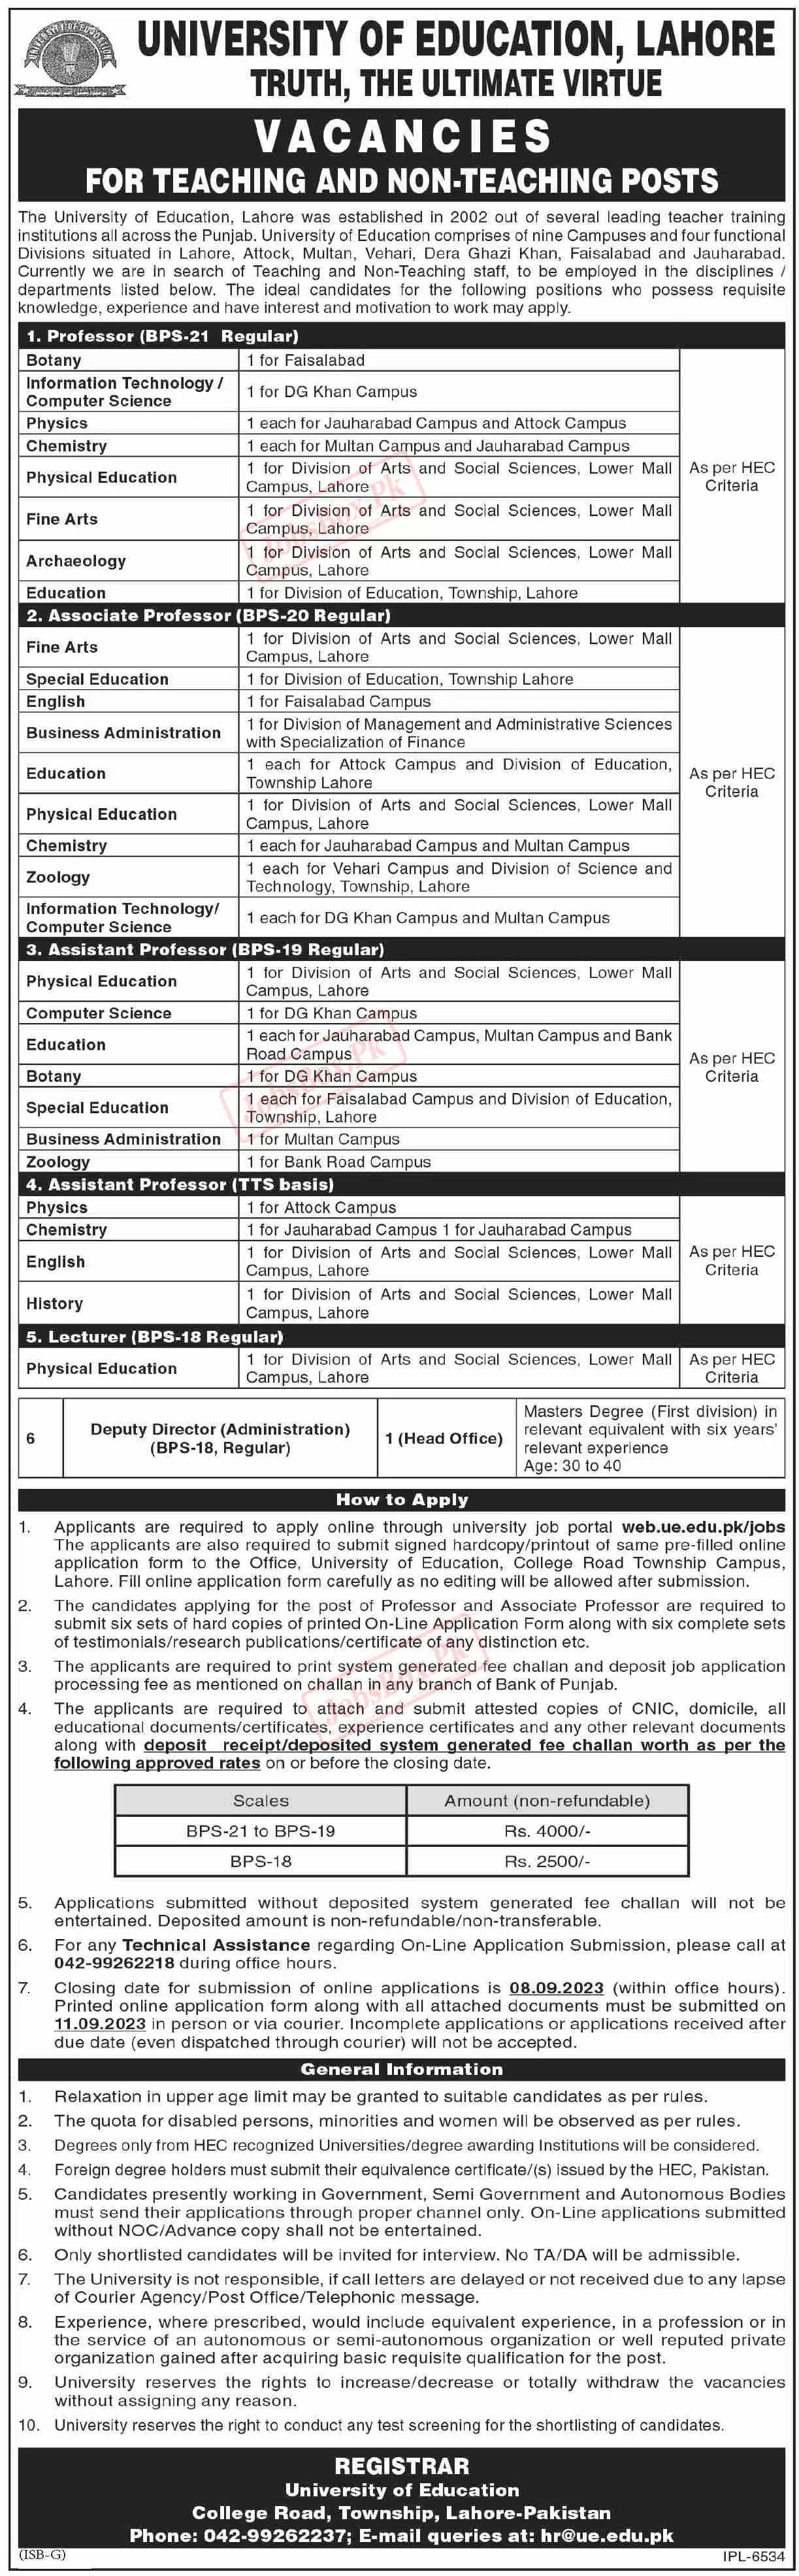 University of Education UE Lahore Jobs 2023 Current Opportunities